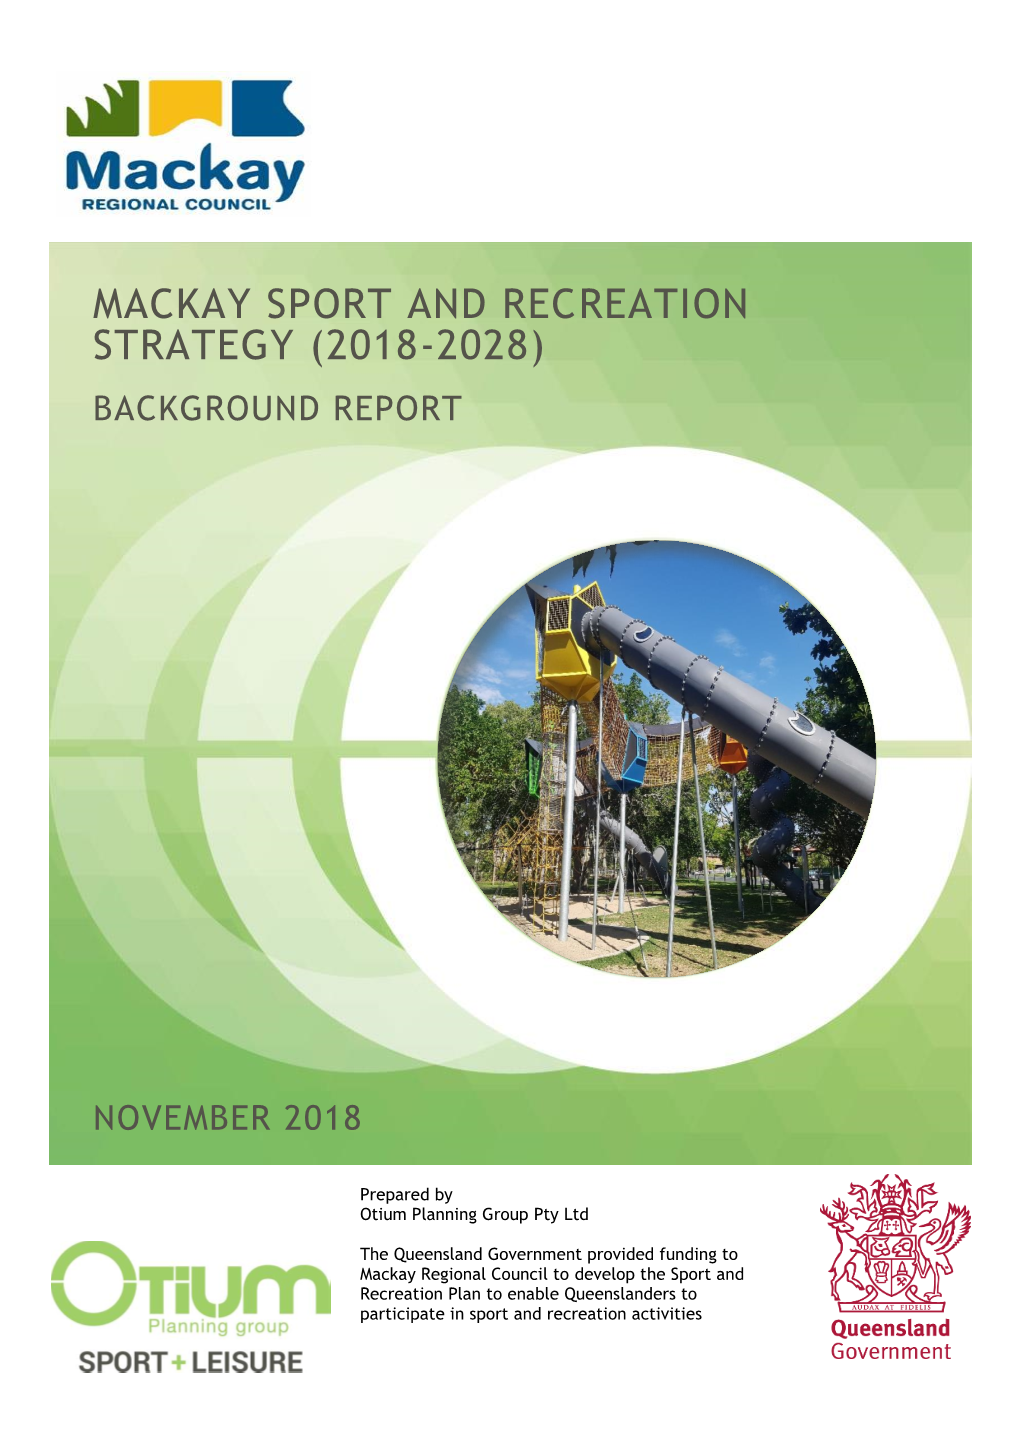 Mackay Sport and Recreation Strategy (2018-2028) Background Report